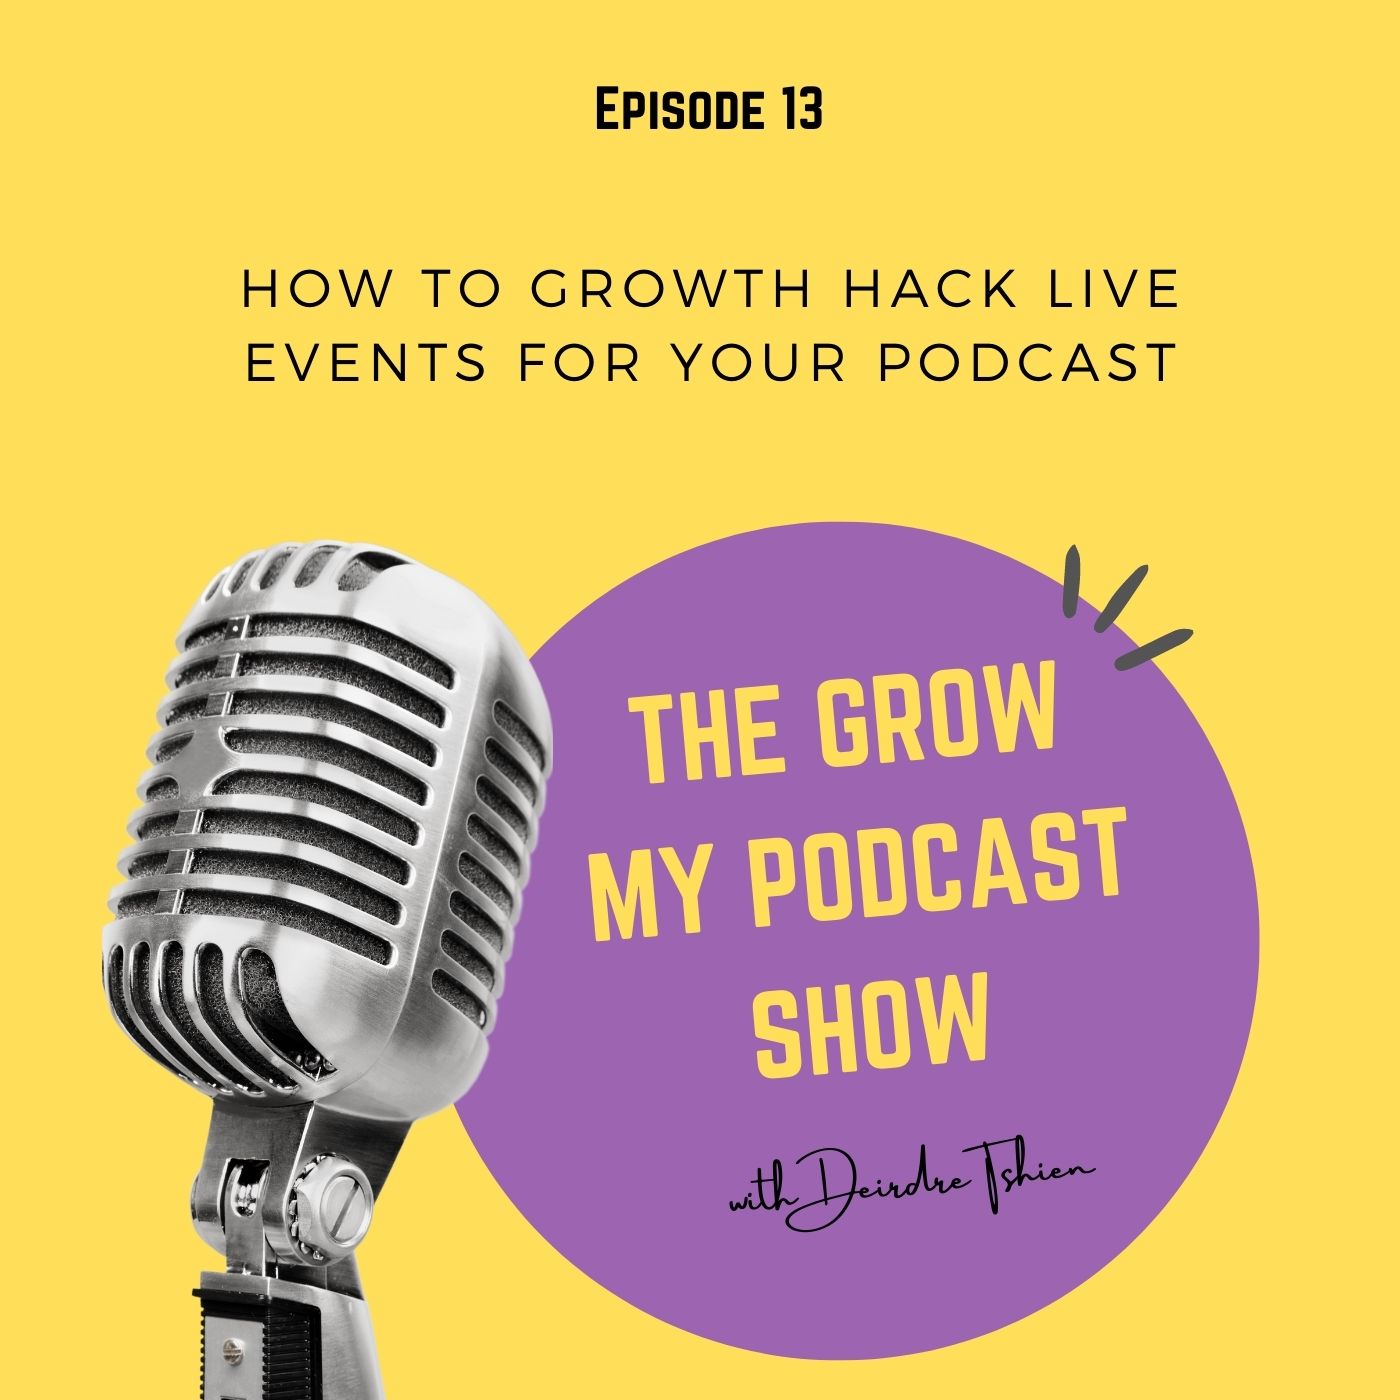 How to Growth Hack live events for your podcast